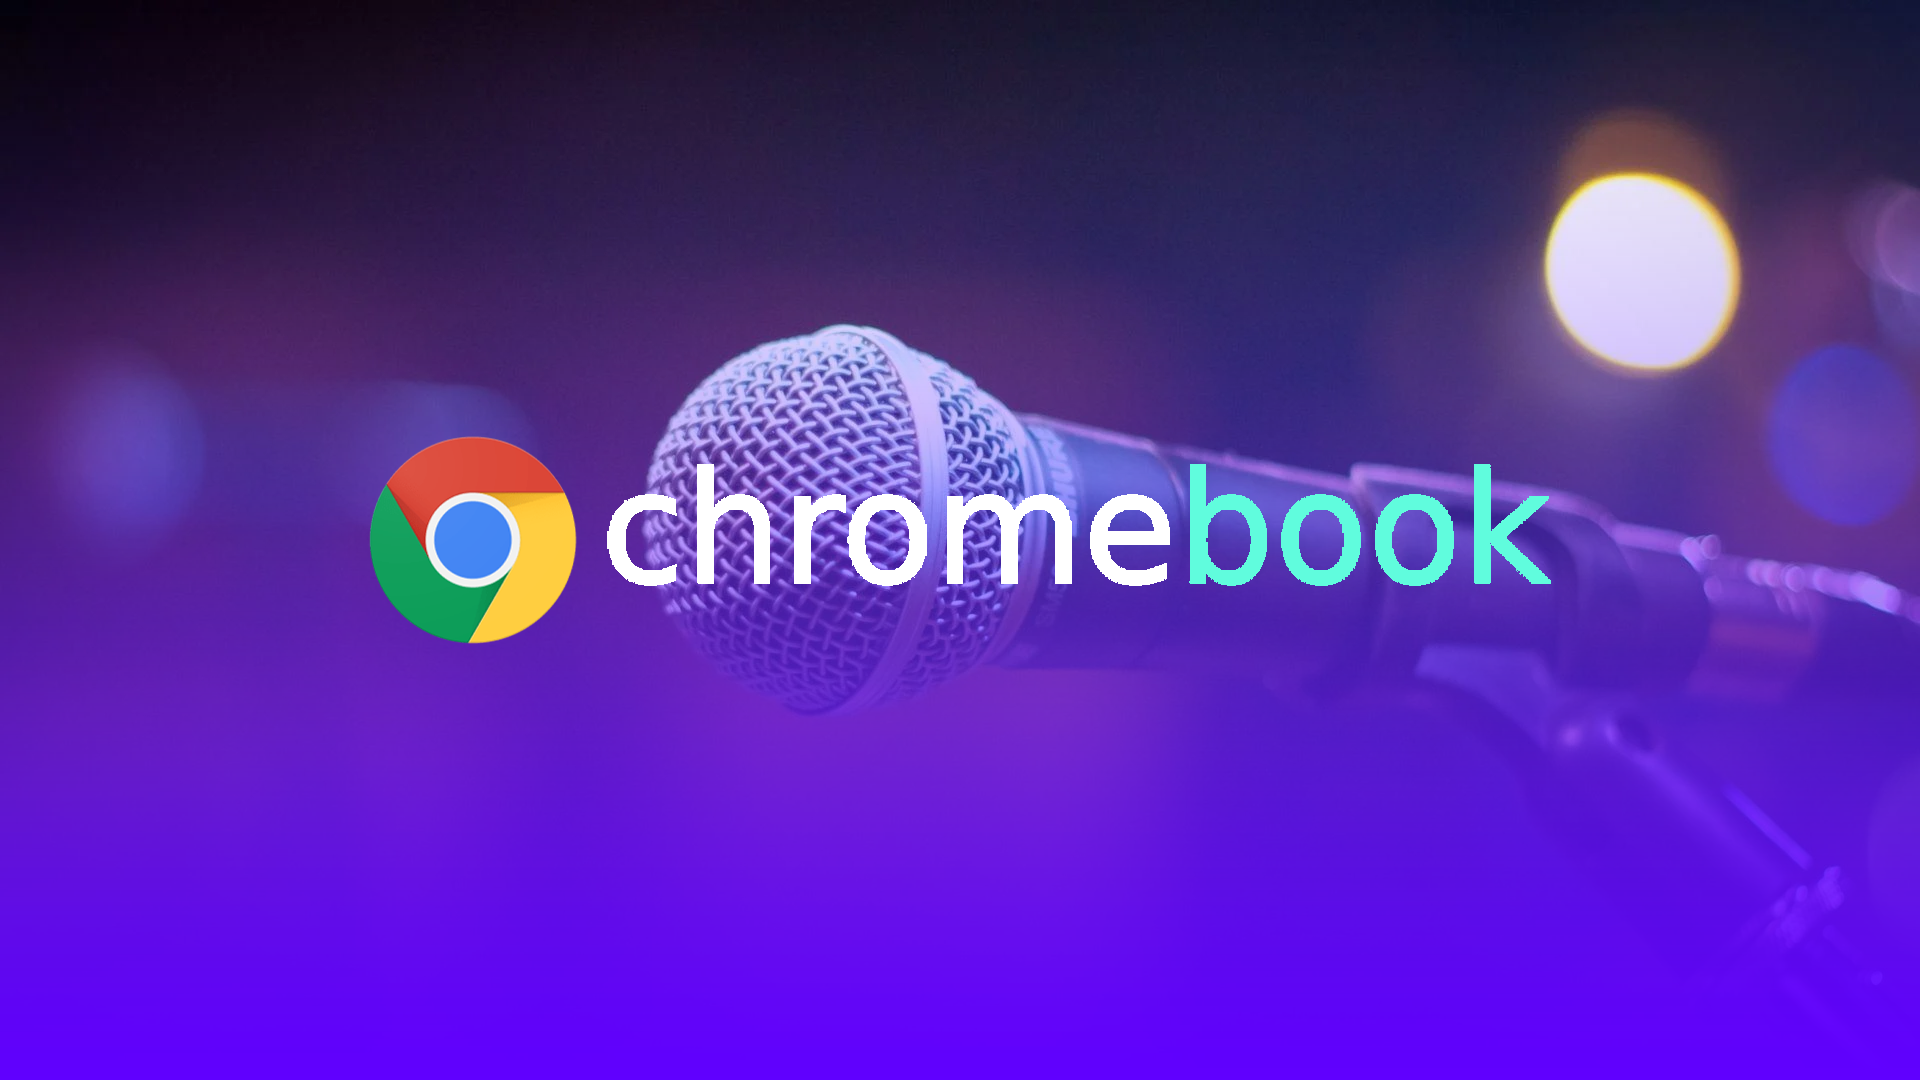 How to disable Voice Control on Chromebook